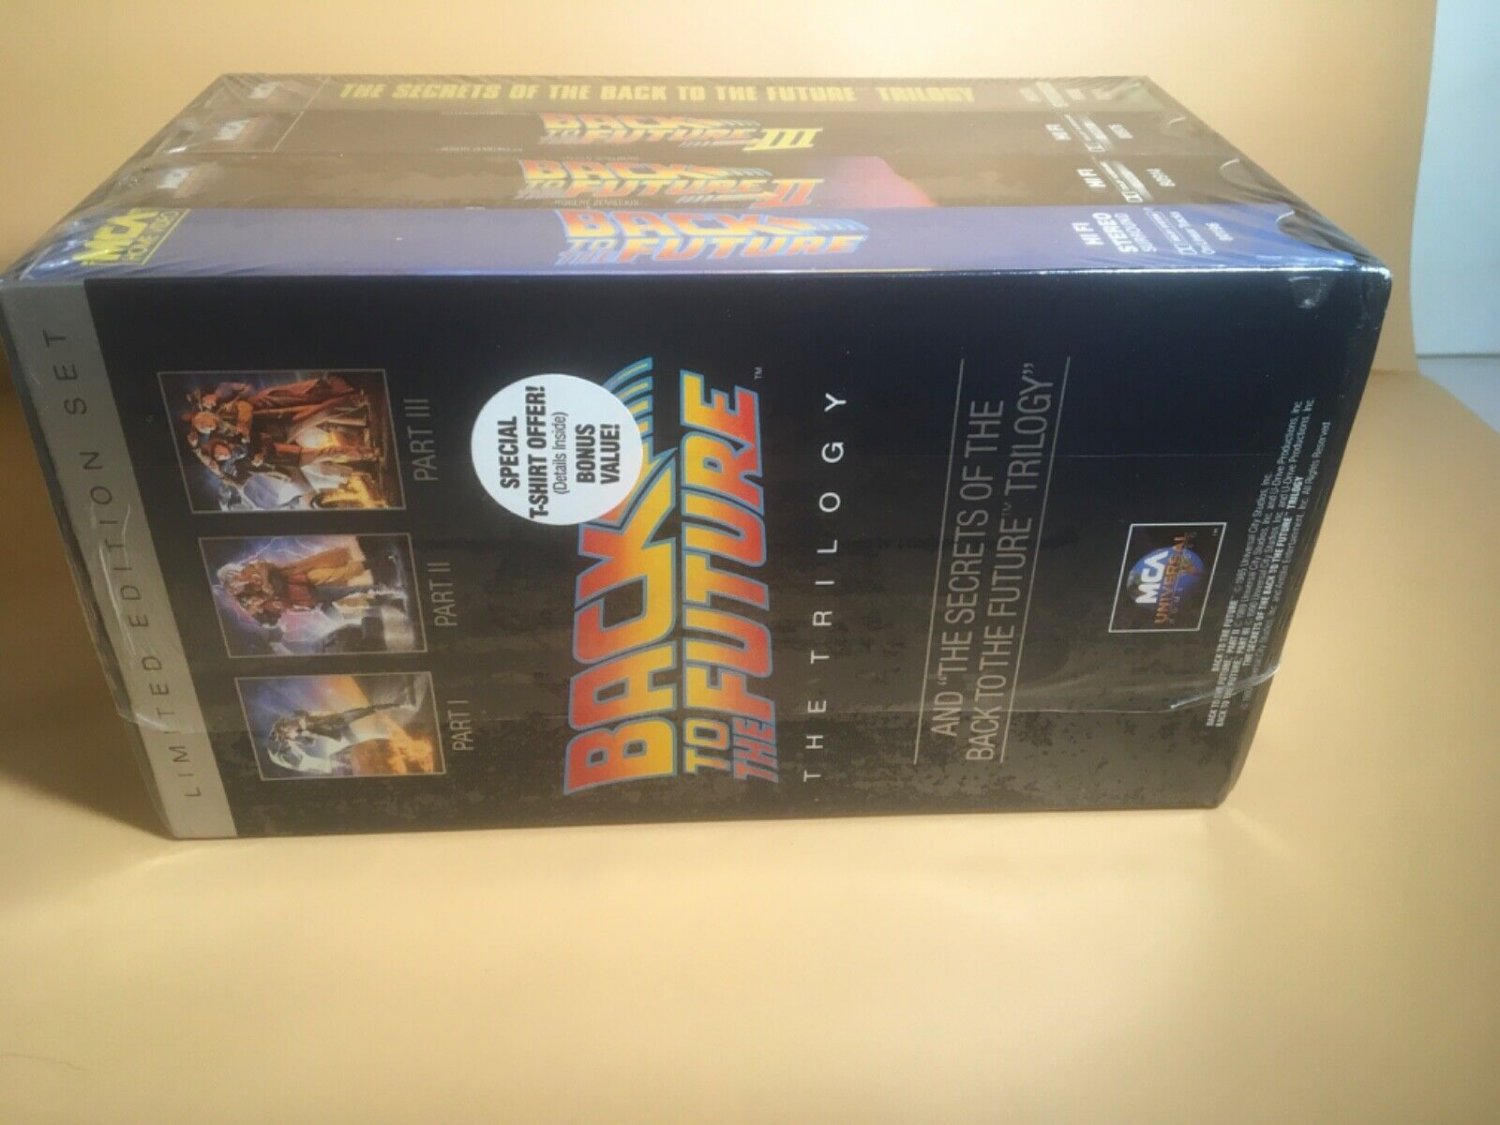 BACK TO THE FUTURE VHS TRILOGY BOX SET FACTORY SEALED NEW MINT YELLOW ...